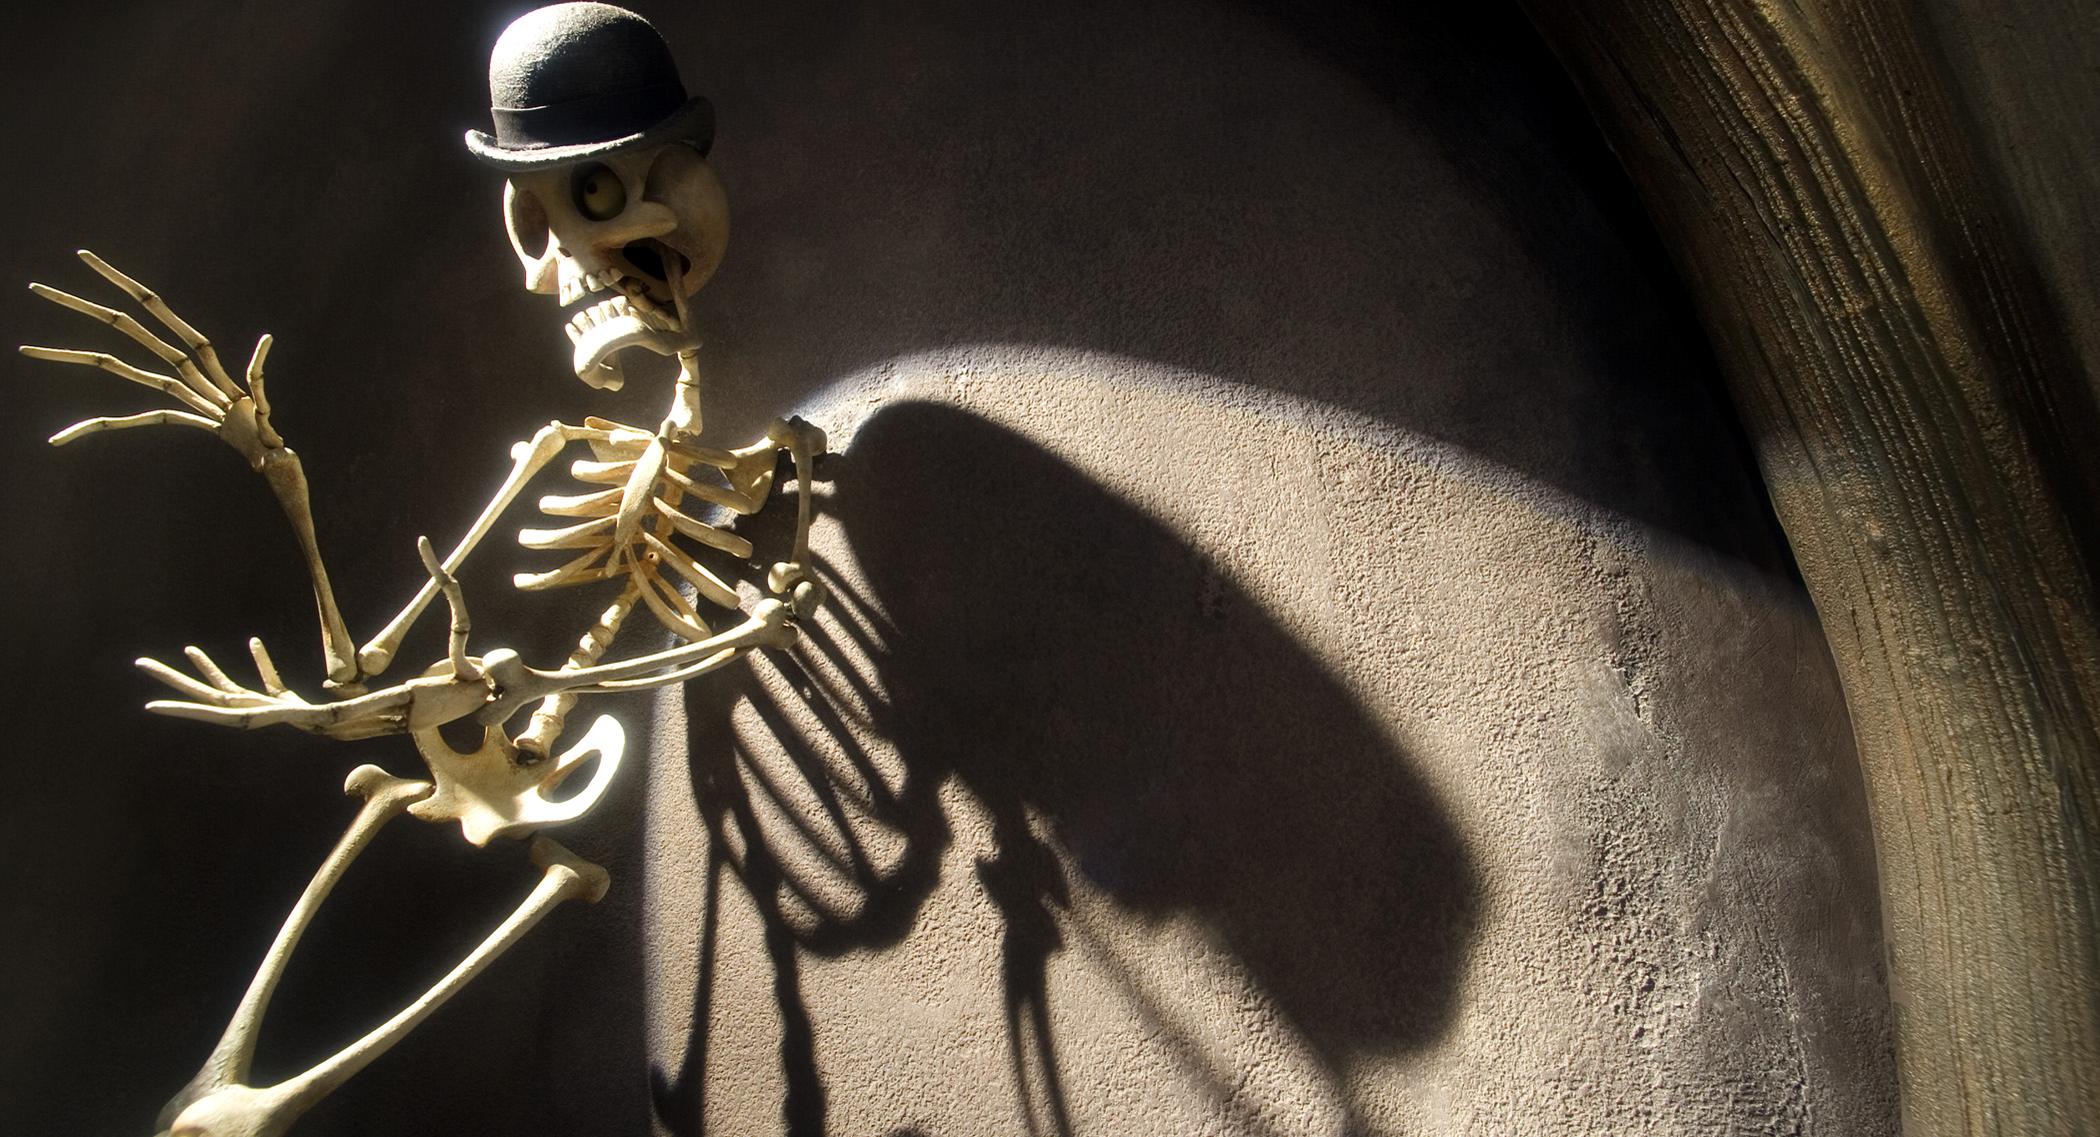 Skeleton From Corpse Bride - HD Wallpaper 